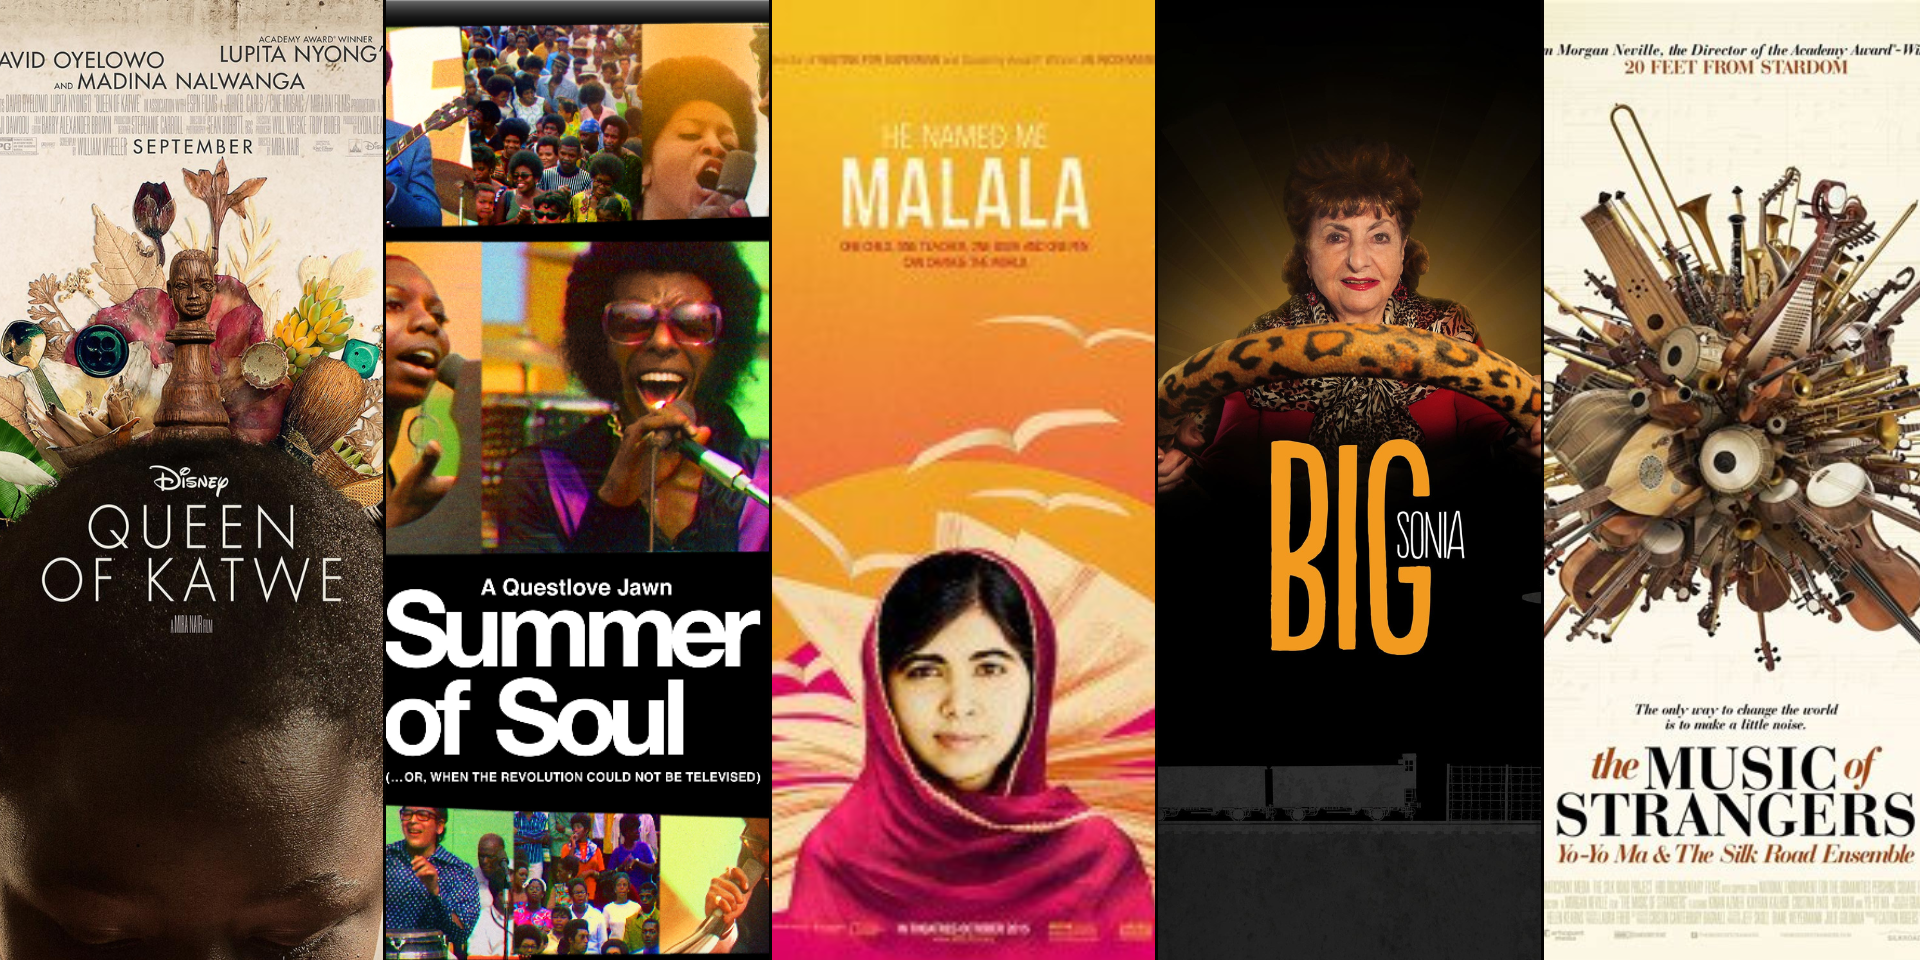 Banner image featuring the following movie posters: Queen of Katwe, Summer of Soul, He Named Me Malala, Big Sonia, The Music of Strangers 